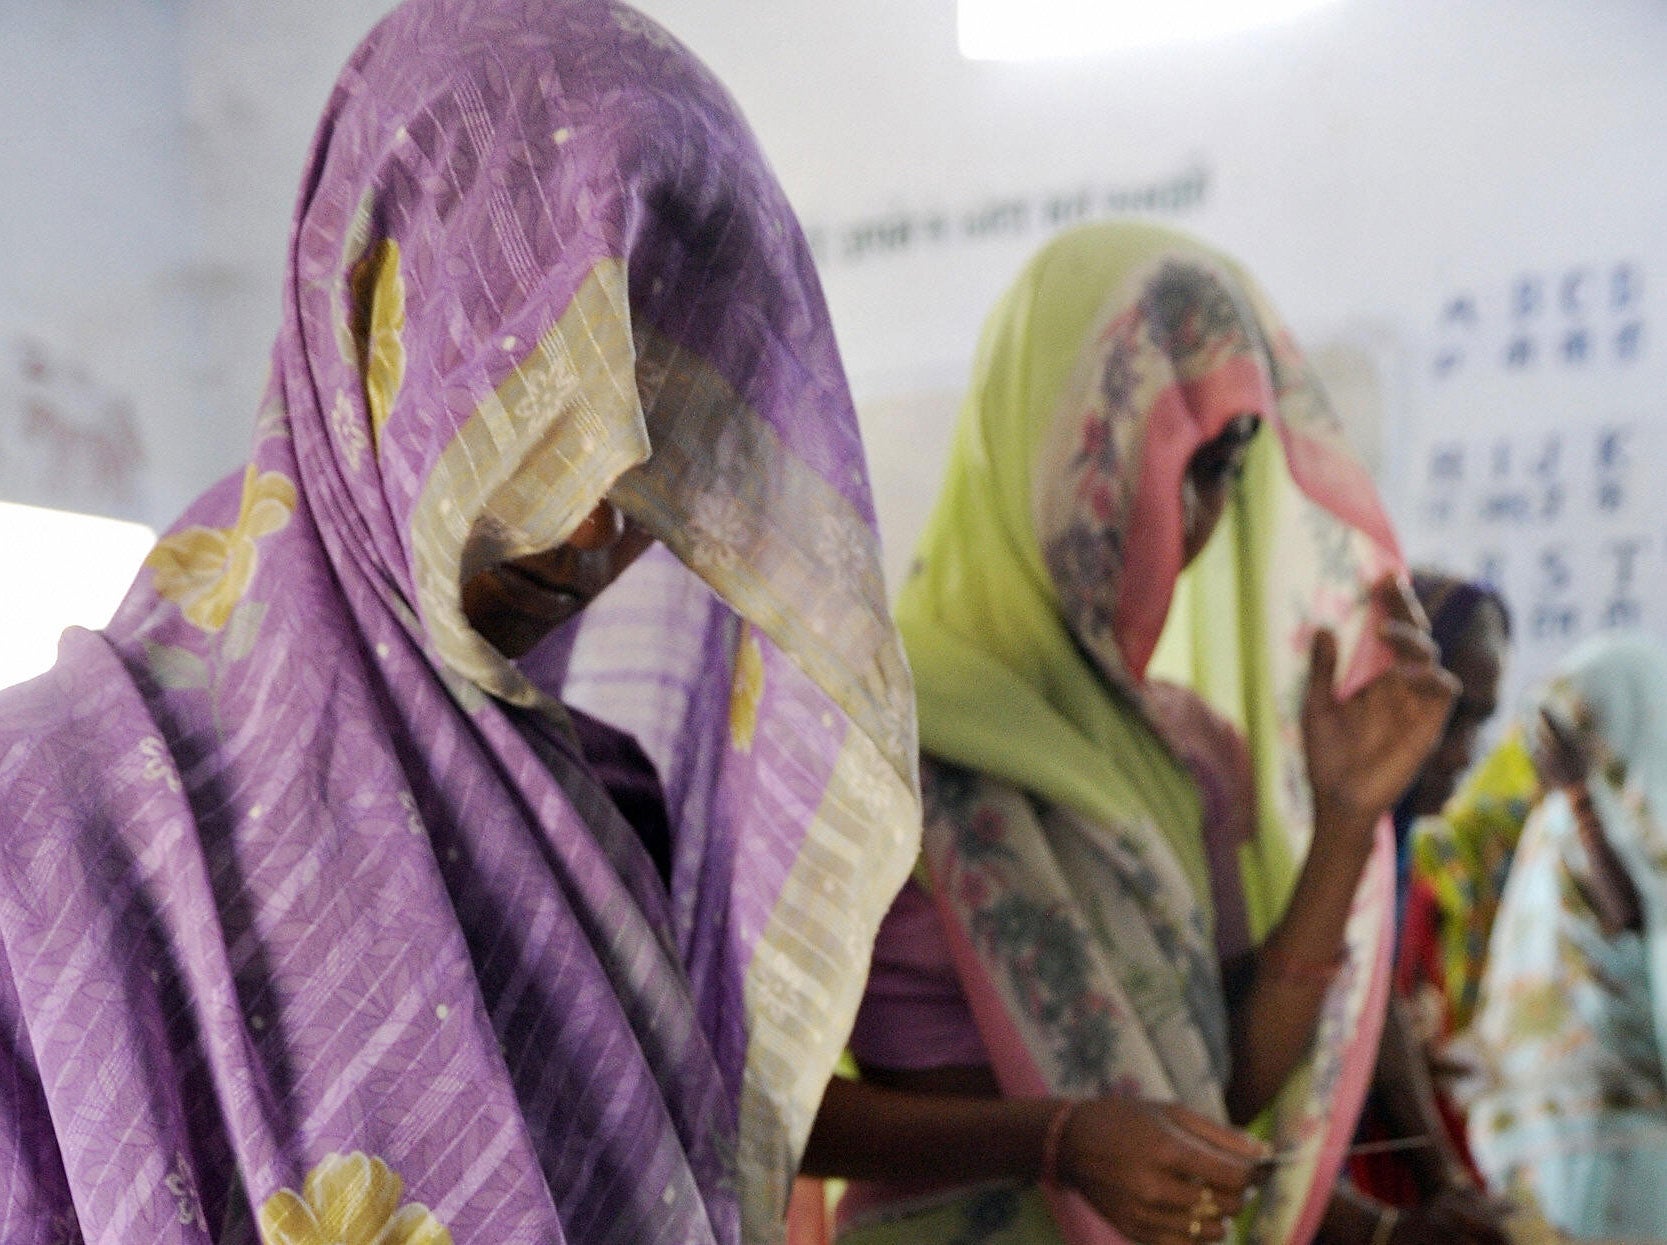 Campaigners say FGM is common in the Bohra community in India